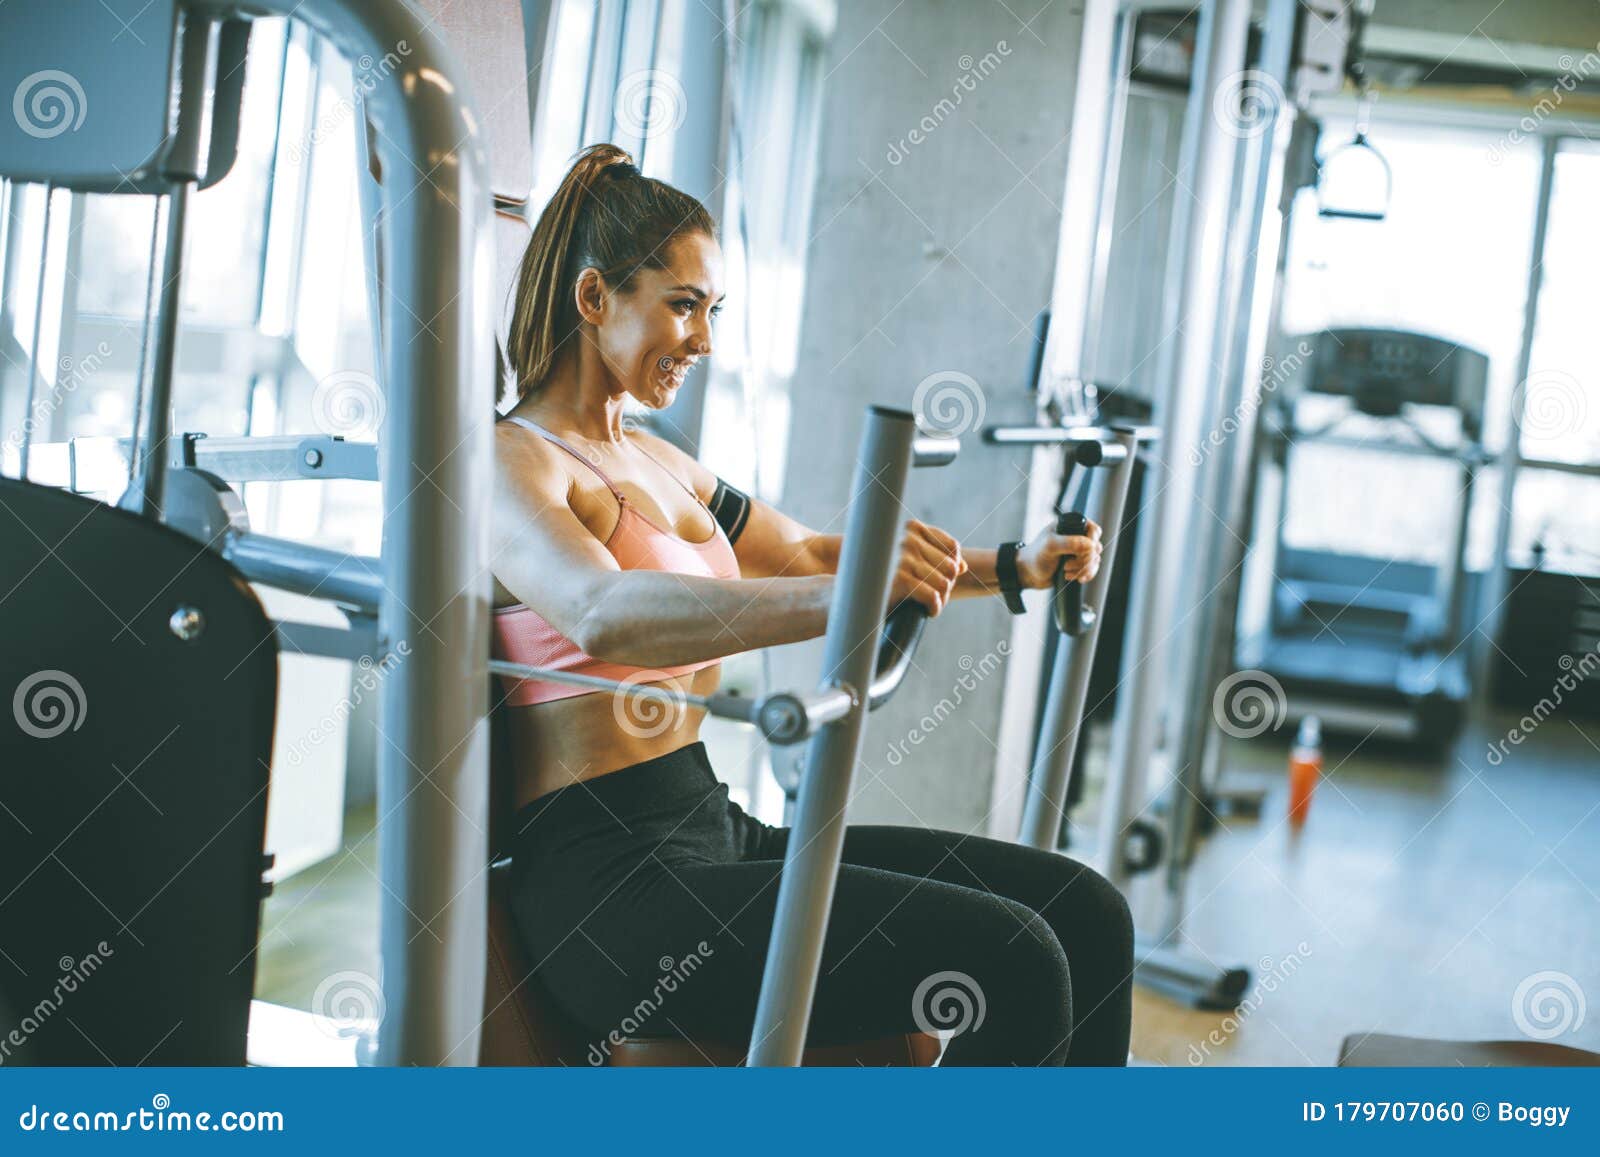 https://thumbs.dreamstime.com/z/young-determined-fitness-woman-doing-exercises-chest-press-machine-modern-gym-pretty-179707060.jpg